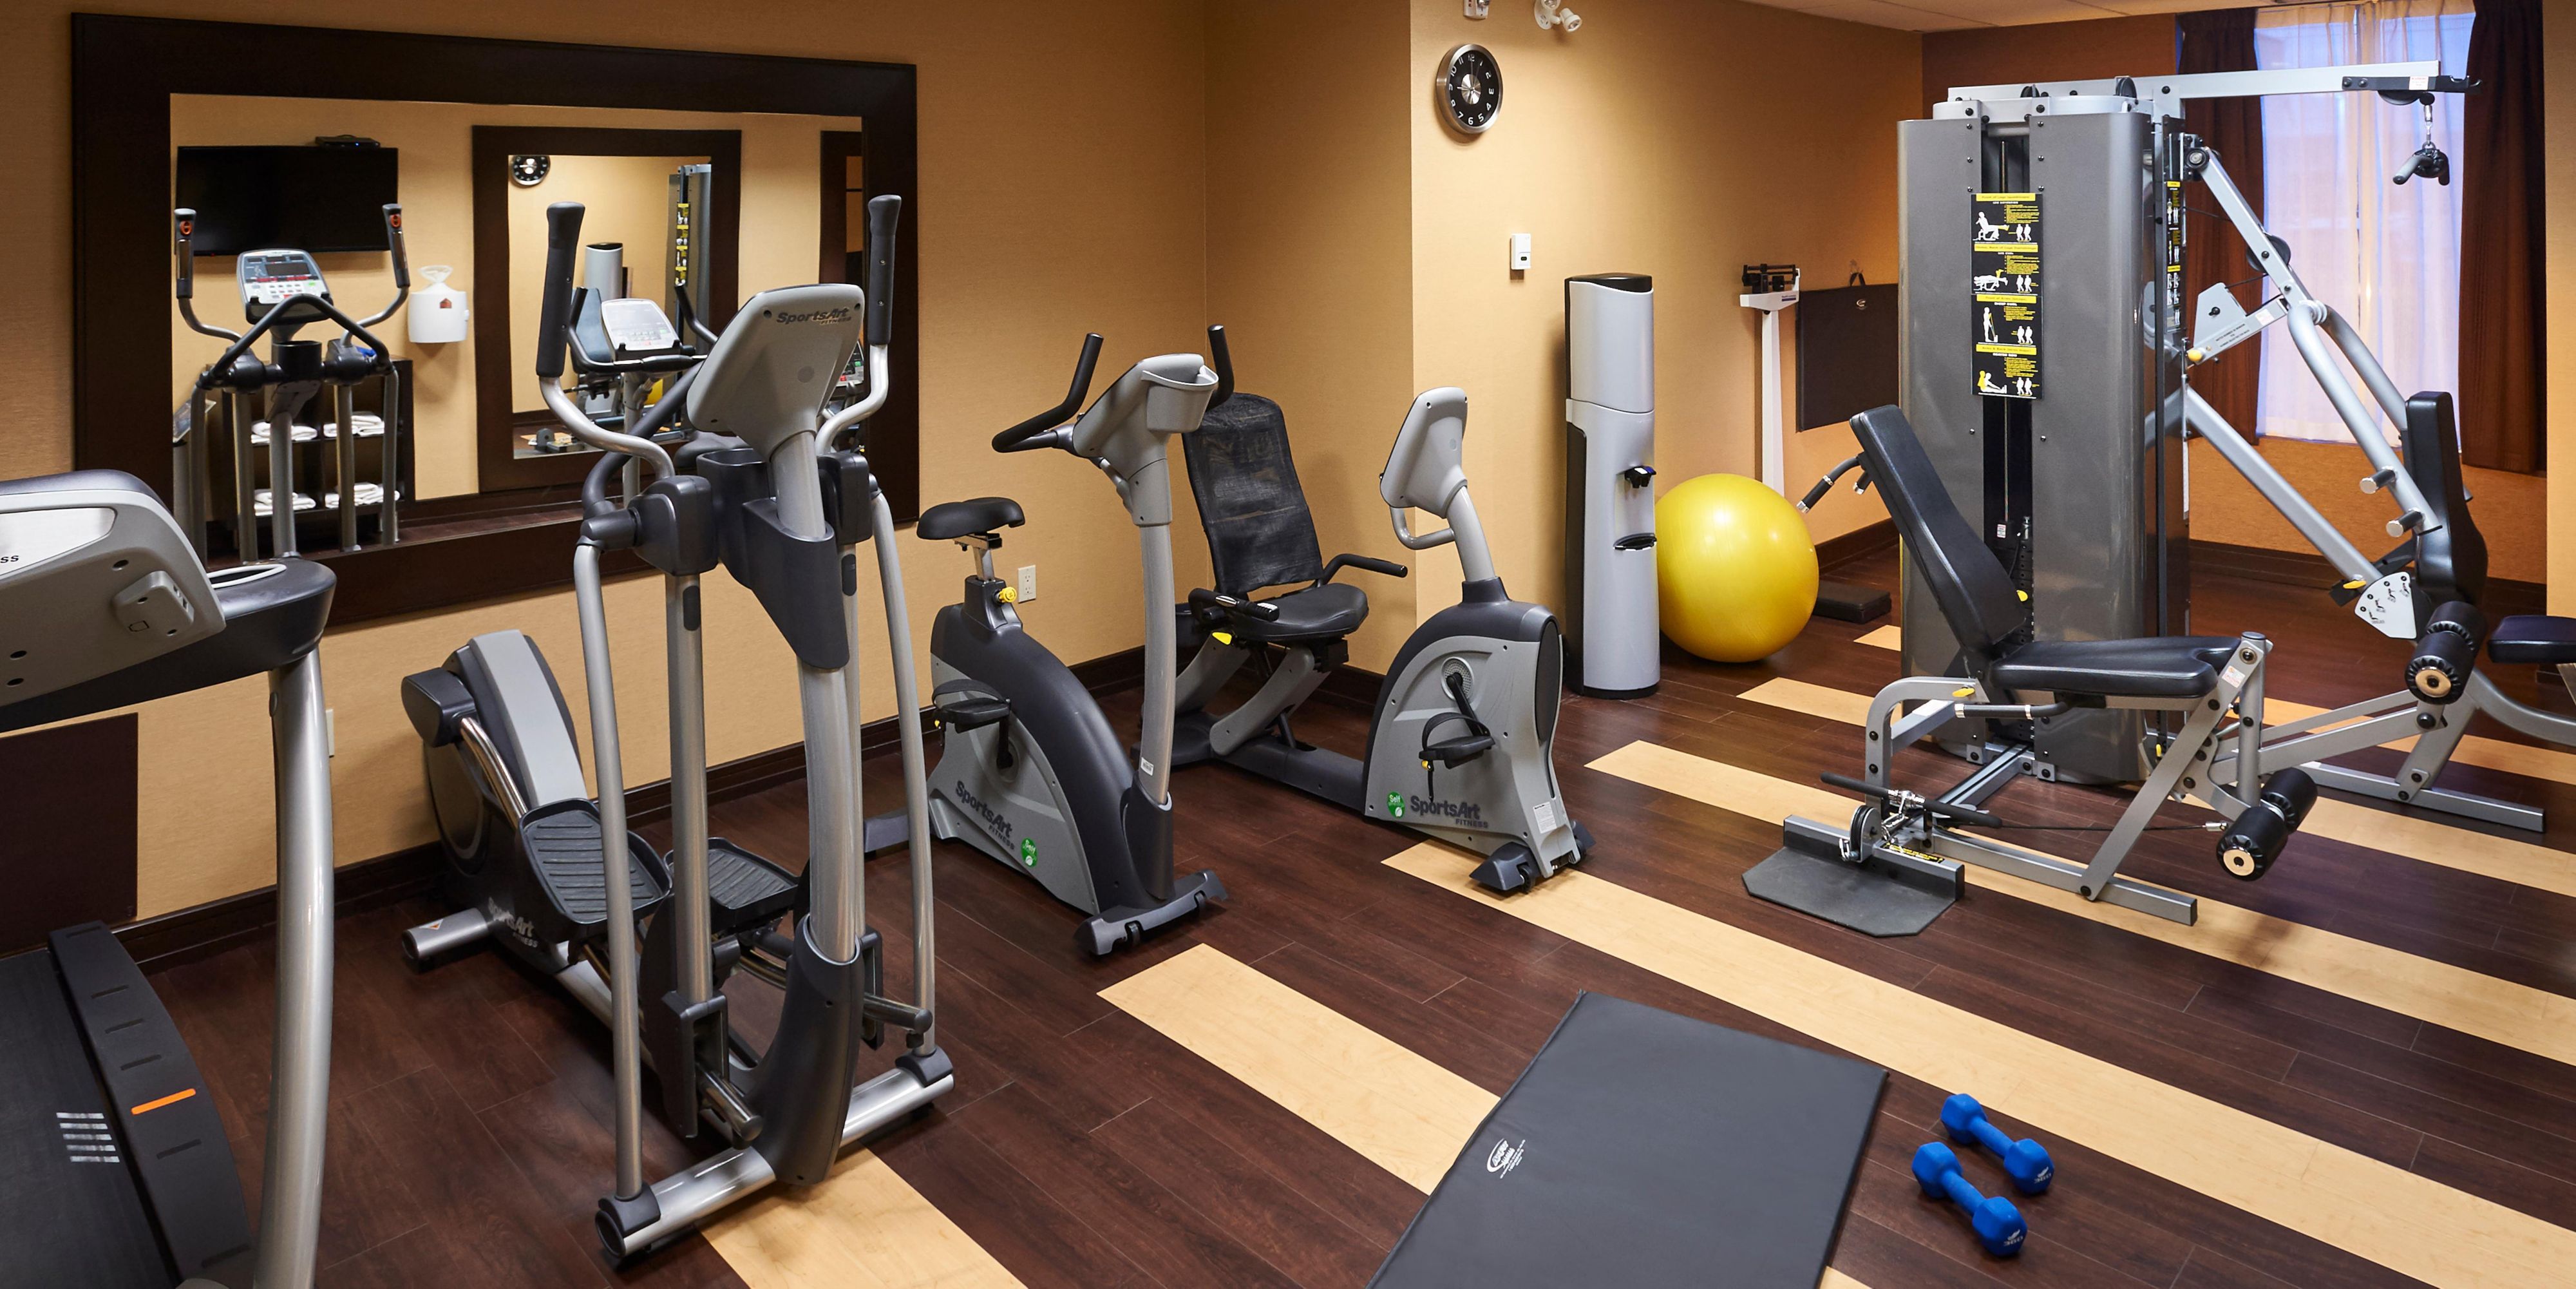 Stay fit in our 24-hour Fitness Centre, complete with treadmill, stationary bike, elliptical machine, free weights, Vanguard multi-gym, yoga ball and mats and scale. Stay entertained while you workout with our 40" LCD TV. 